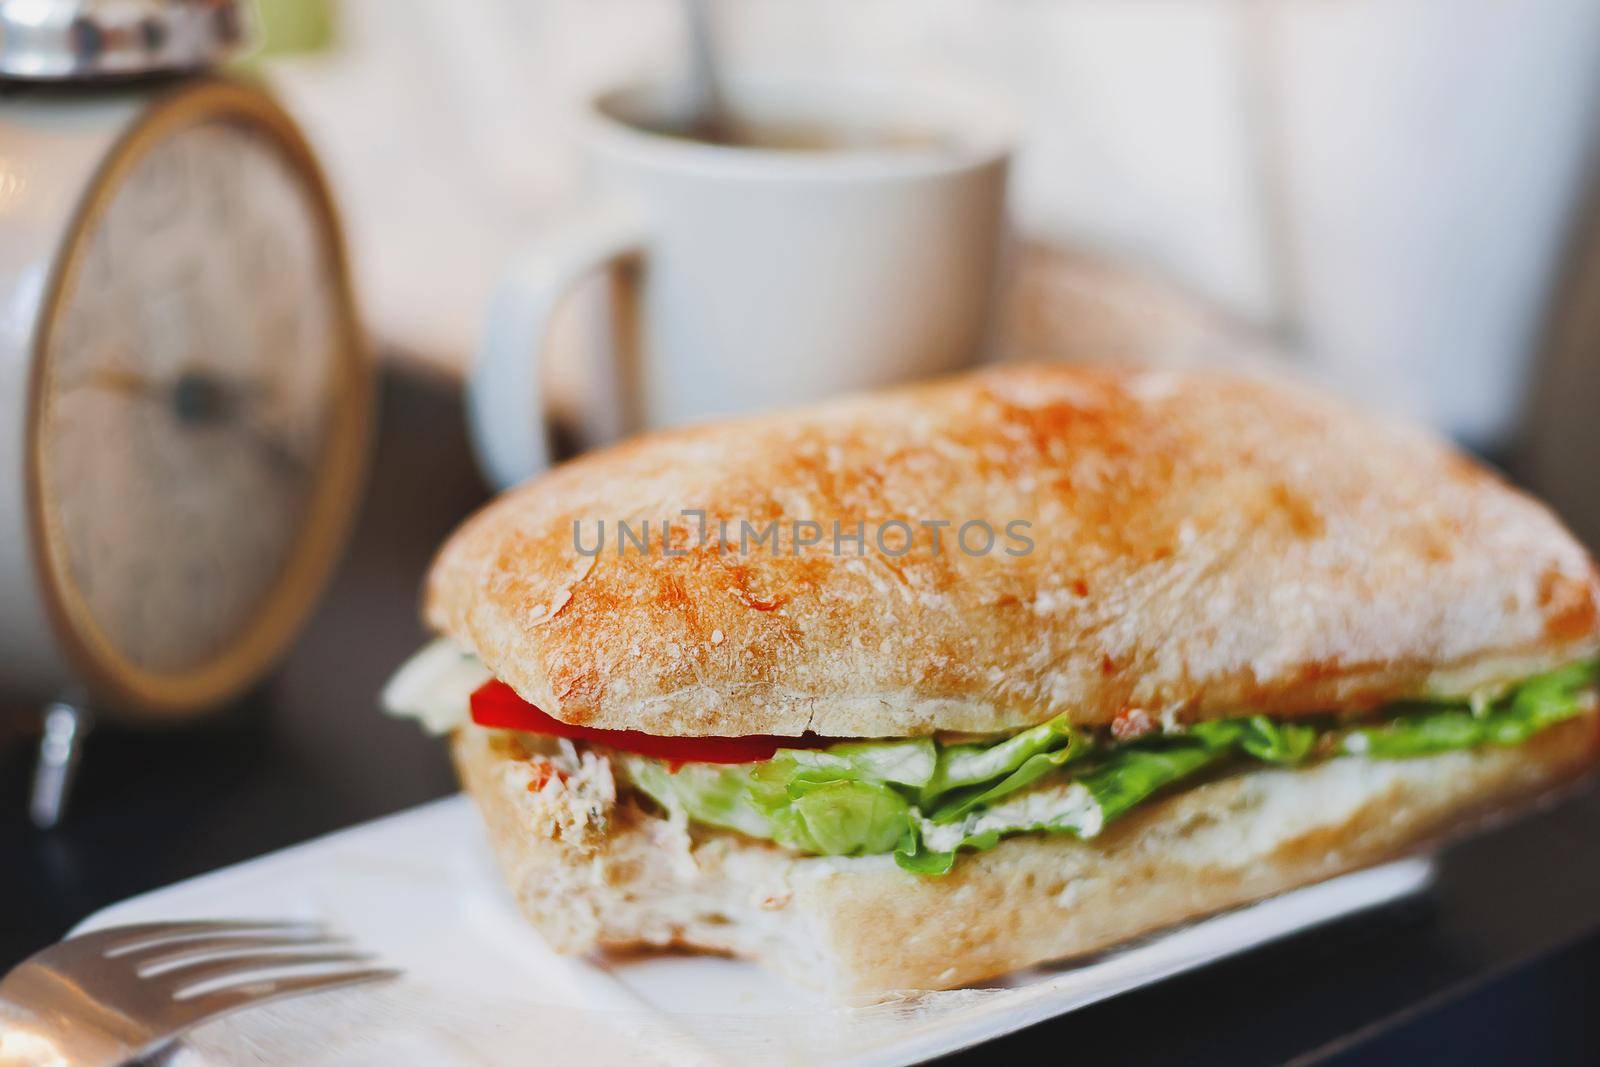 Time for lunch with big tasty sandwich and cup of coffee. Hamburger and hot beverage for coffee break.